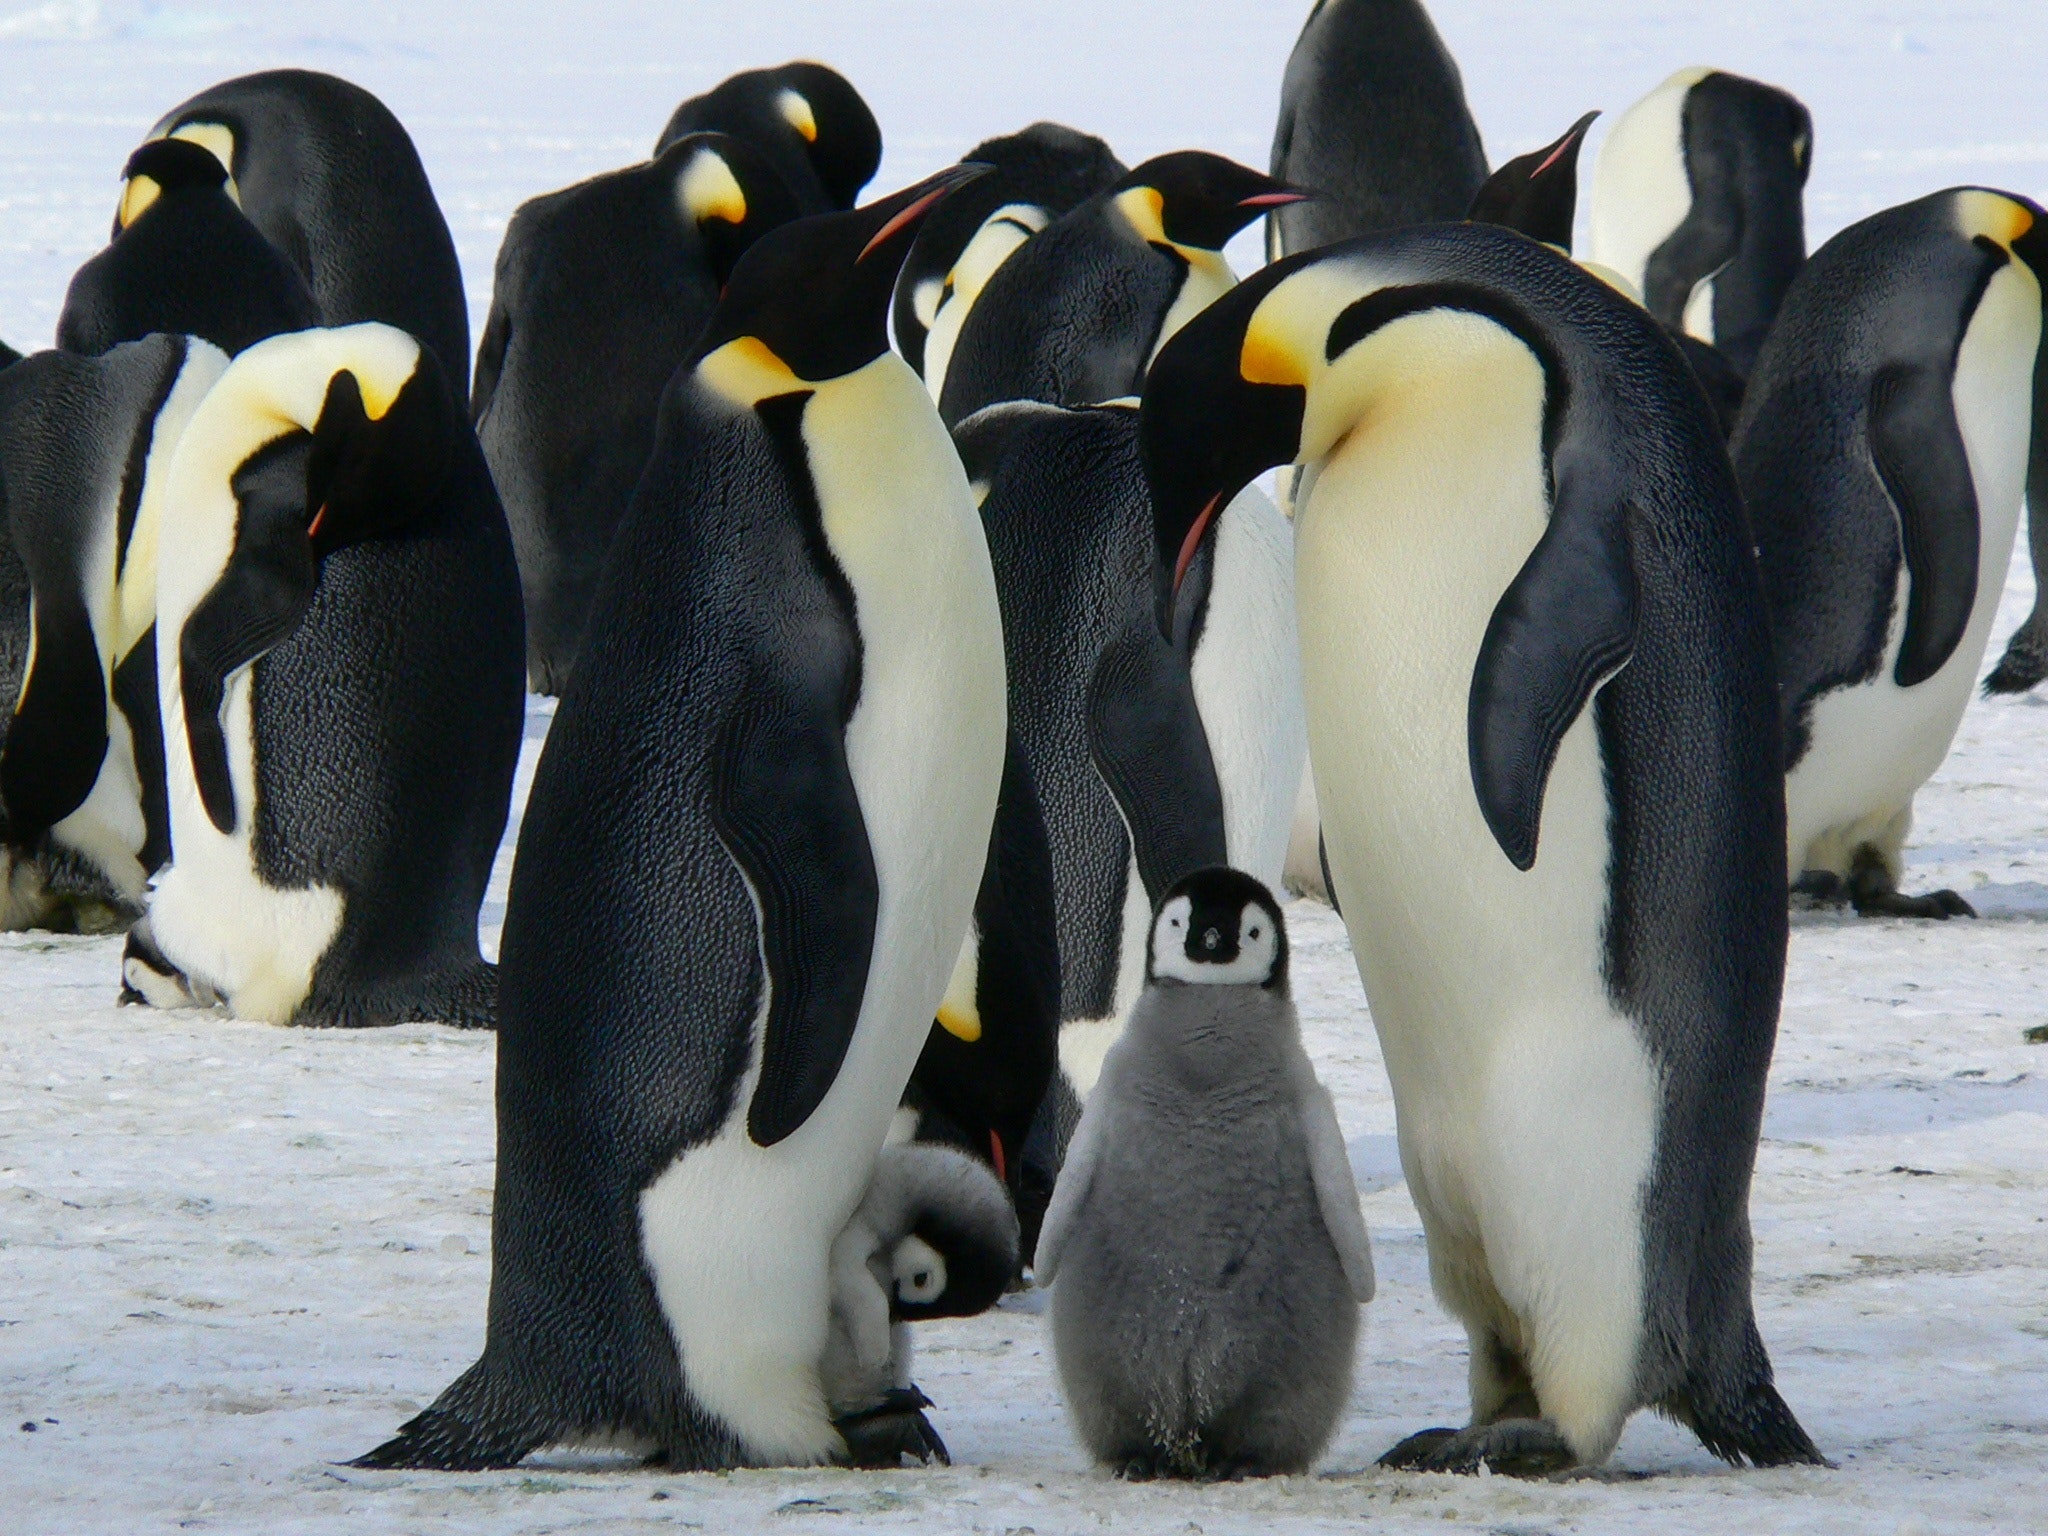 A group of penguins with two baby penguins